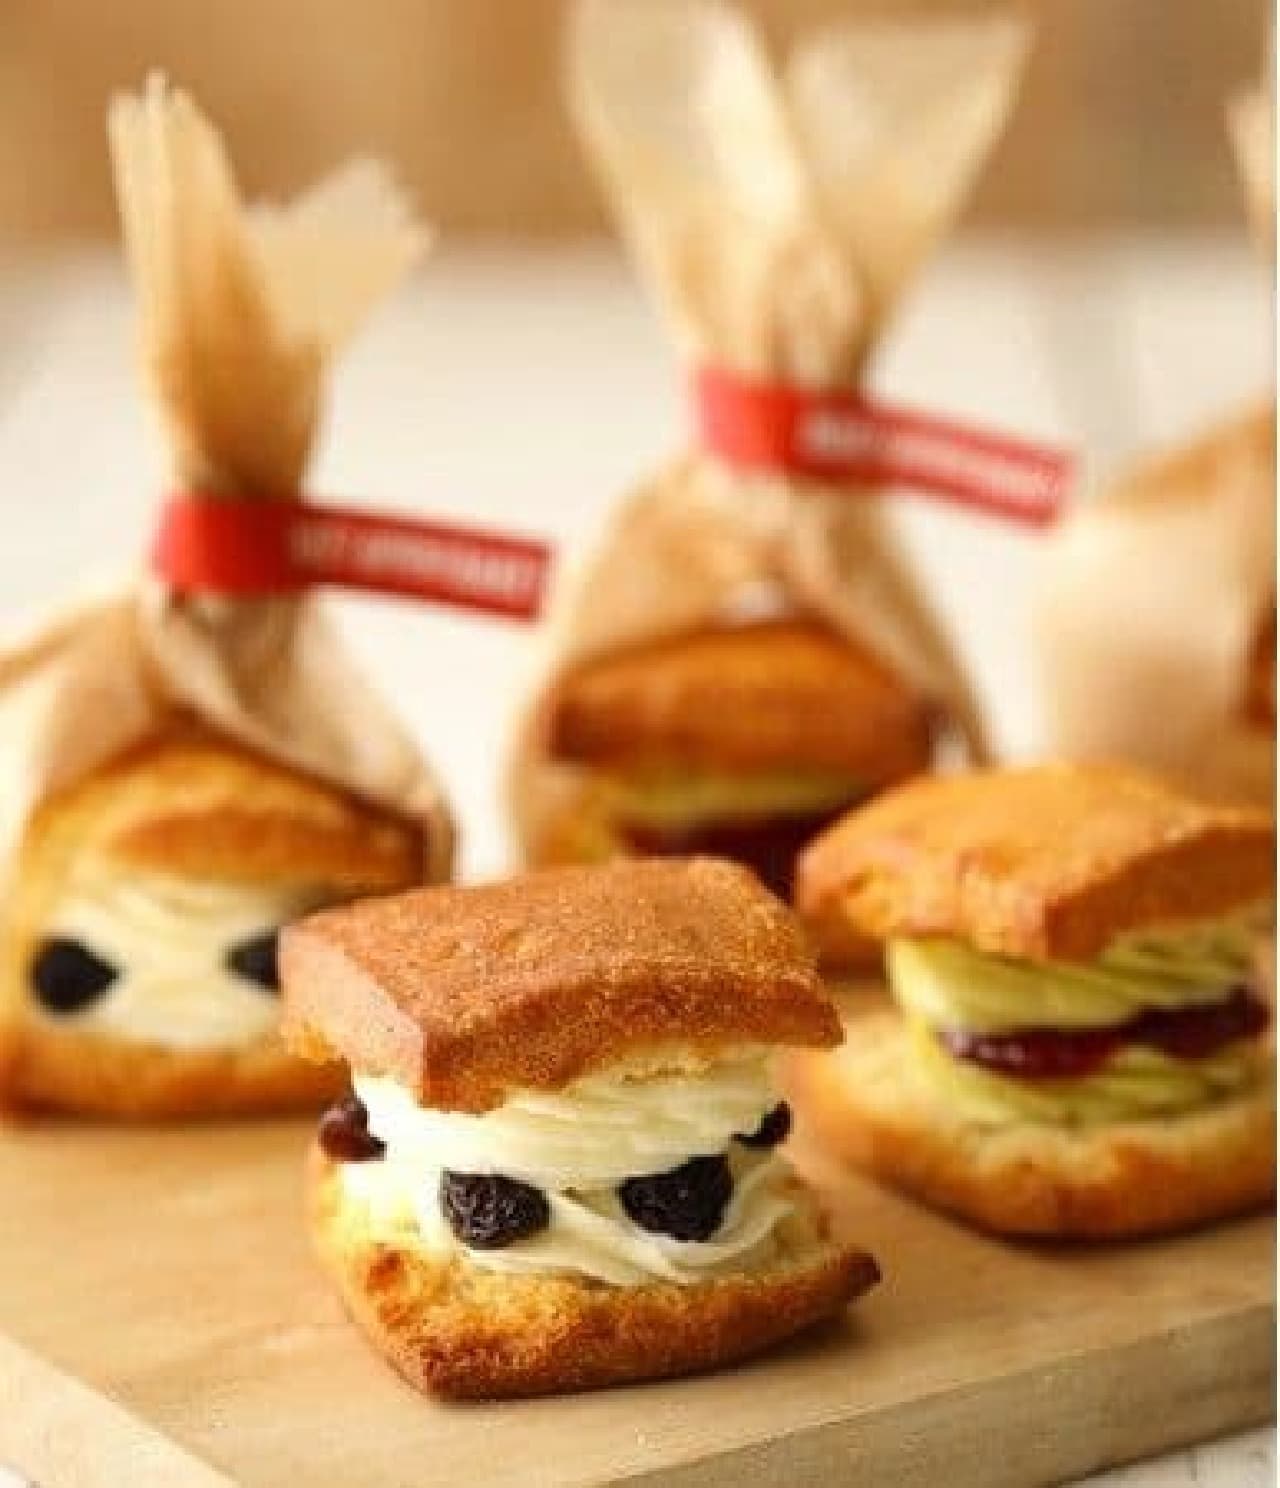 Bakers Gonna Bake Tokyo Gift Palette Store "Biscuit Scone Butter Sand White Chocolate & Rum Raisins"